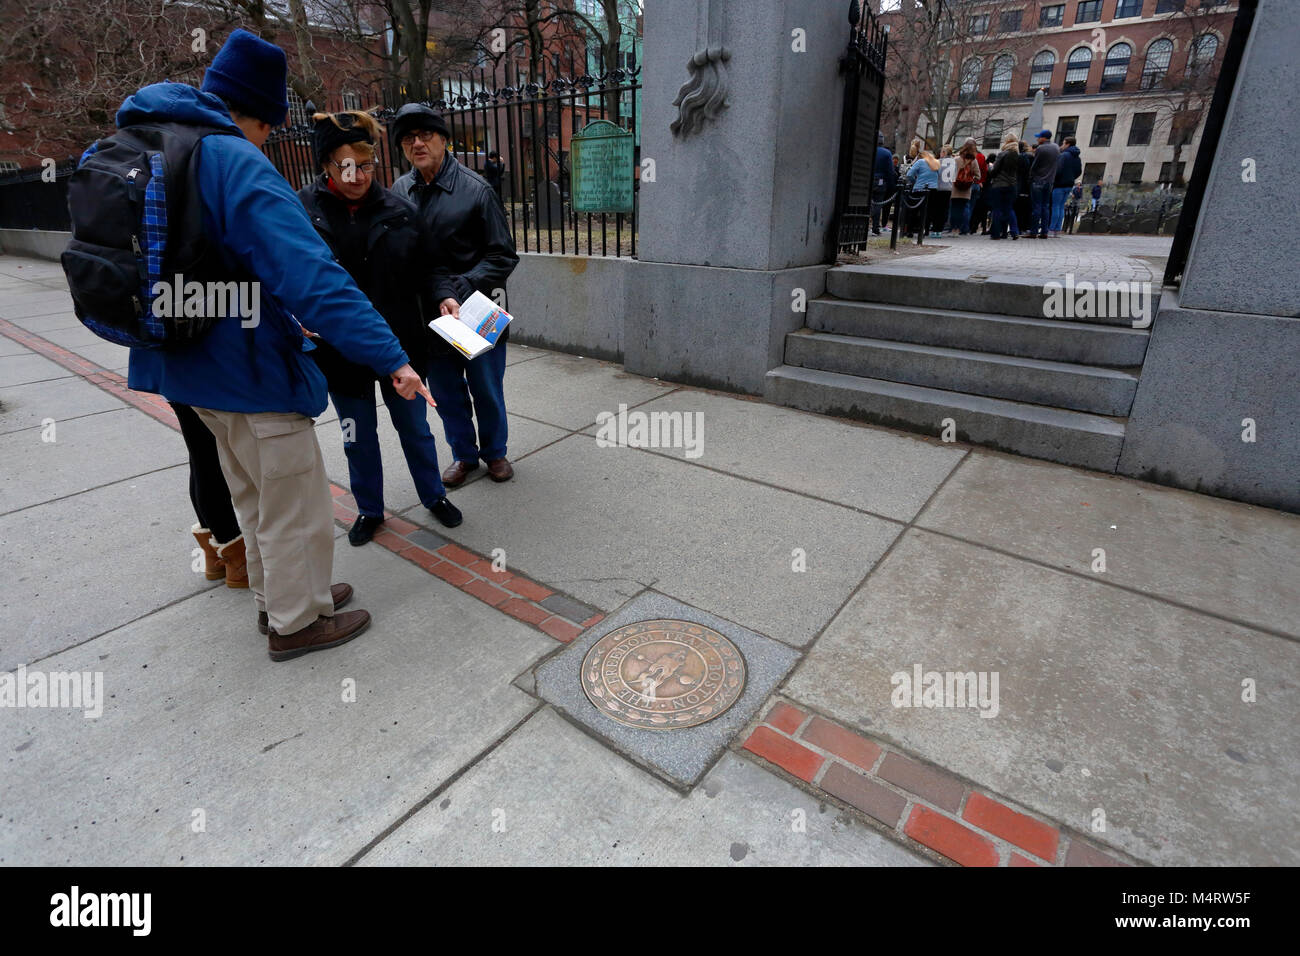 Tourists pointing to a bronze Freedom Trail plaque marking the location of a famous landmark, the Granary Burying Ground, Boston, Massachusetts Stock Photo